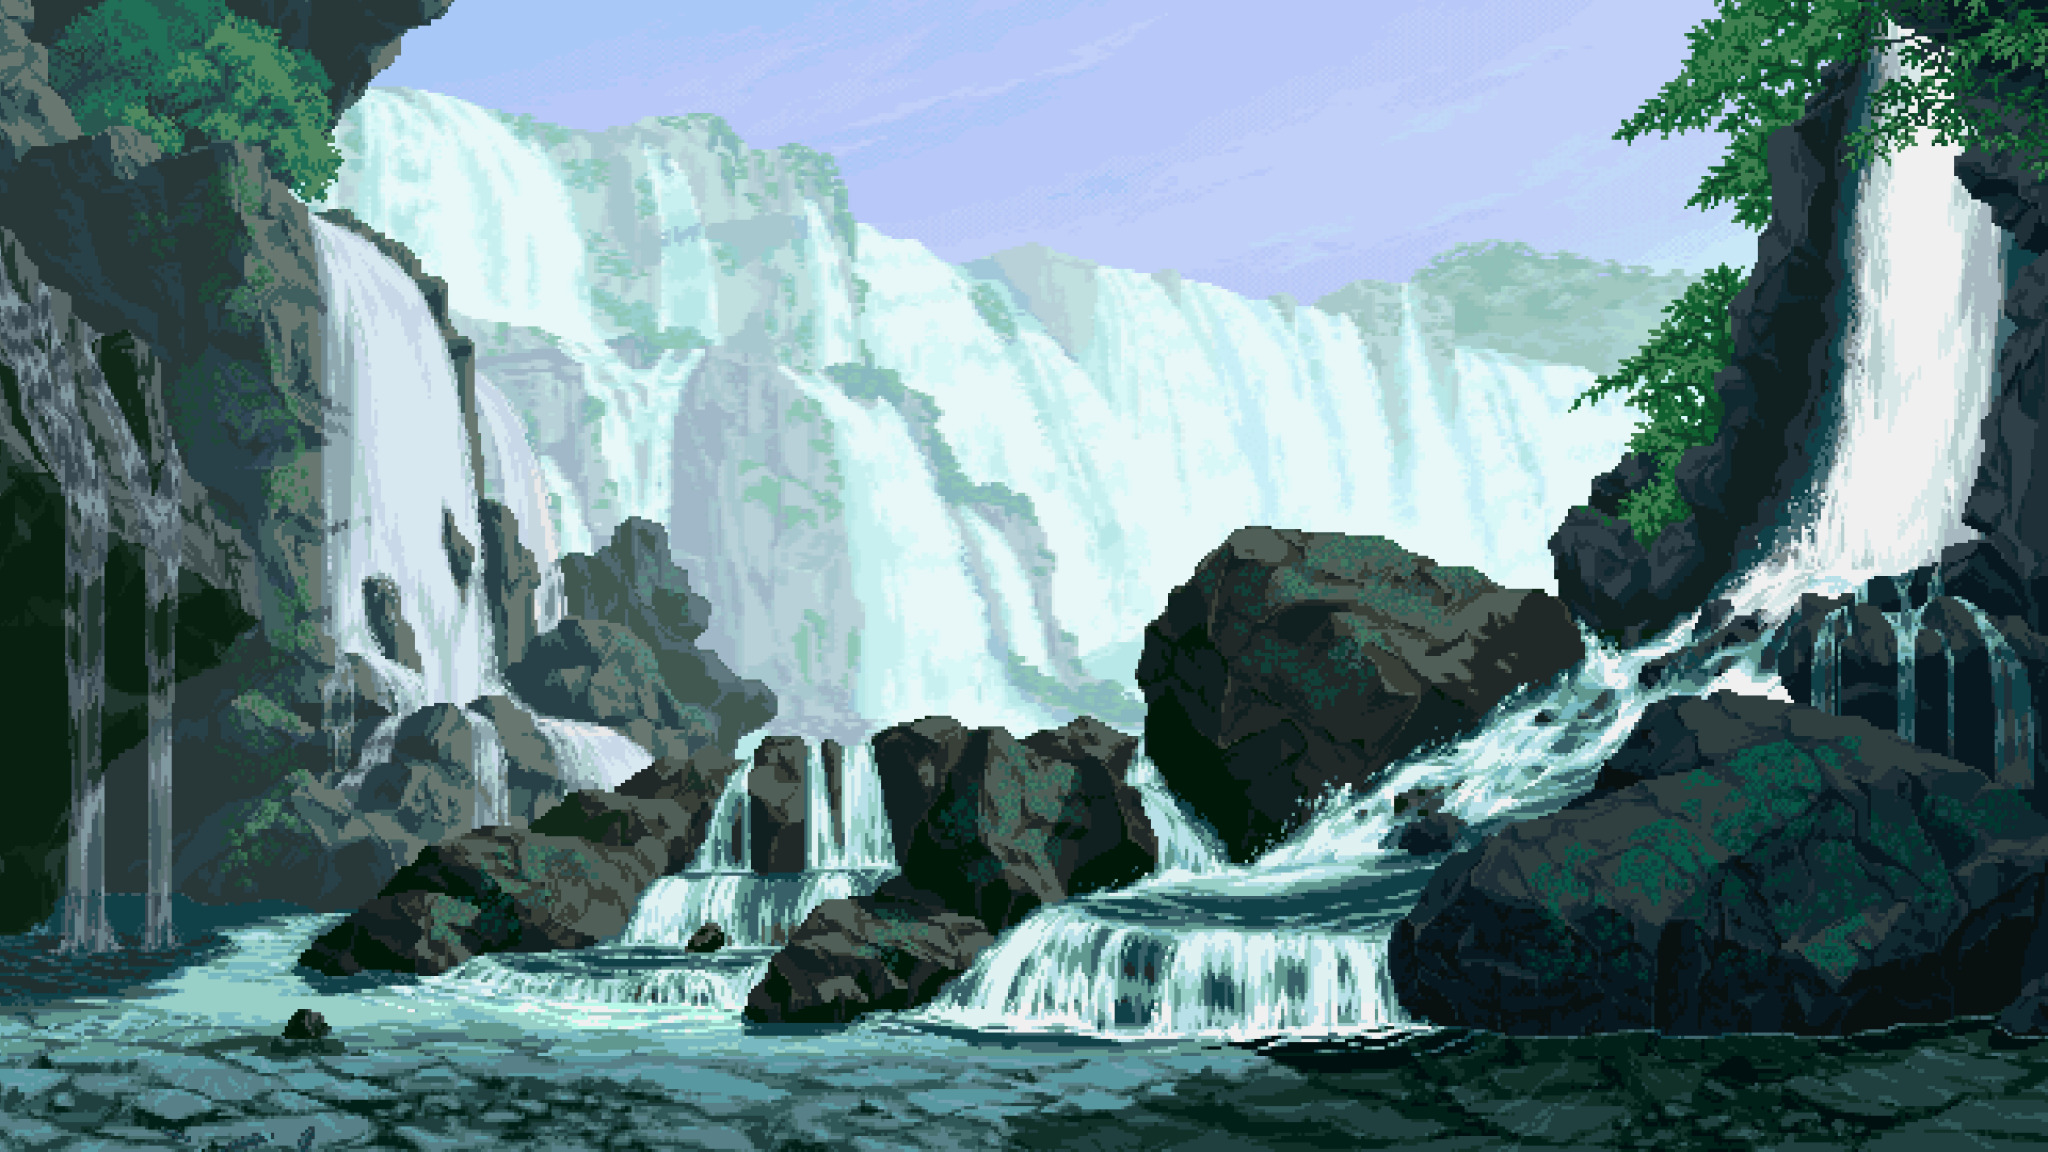 A pixel art image of a waterfall with a blue sky in the background. - Pixel art